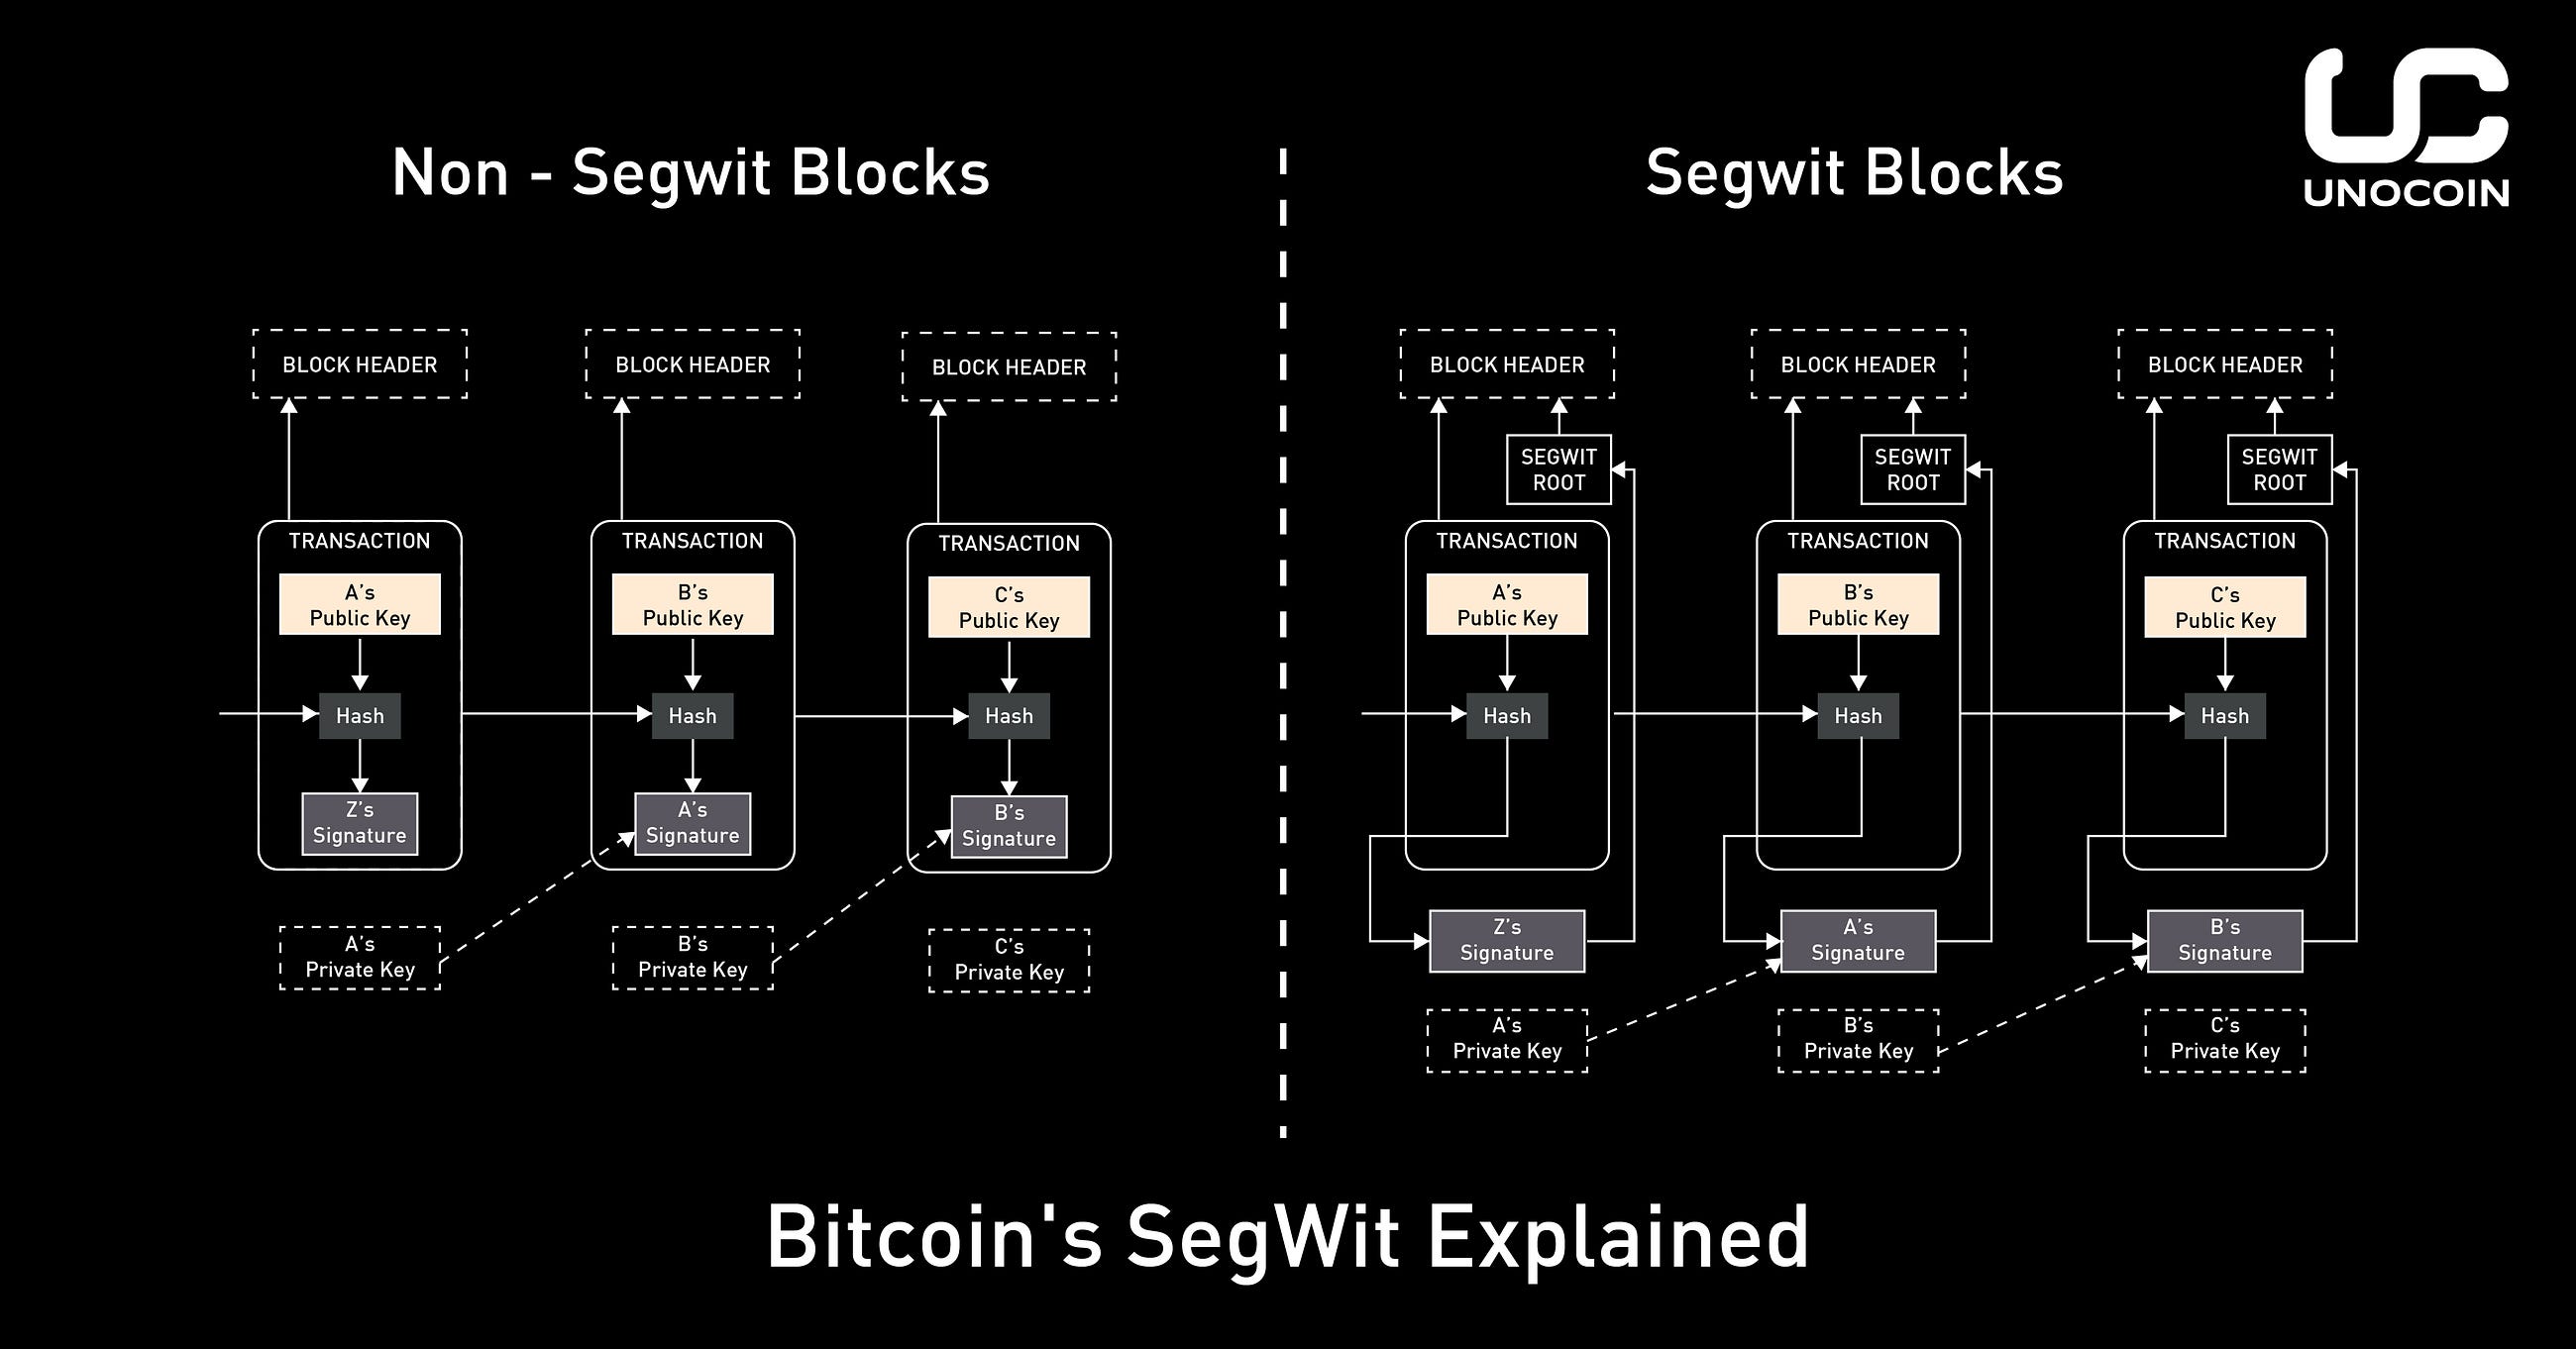 Developer Proposes Hybrid SegWit Solution to Bitcoin’s Block Size Debate